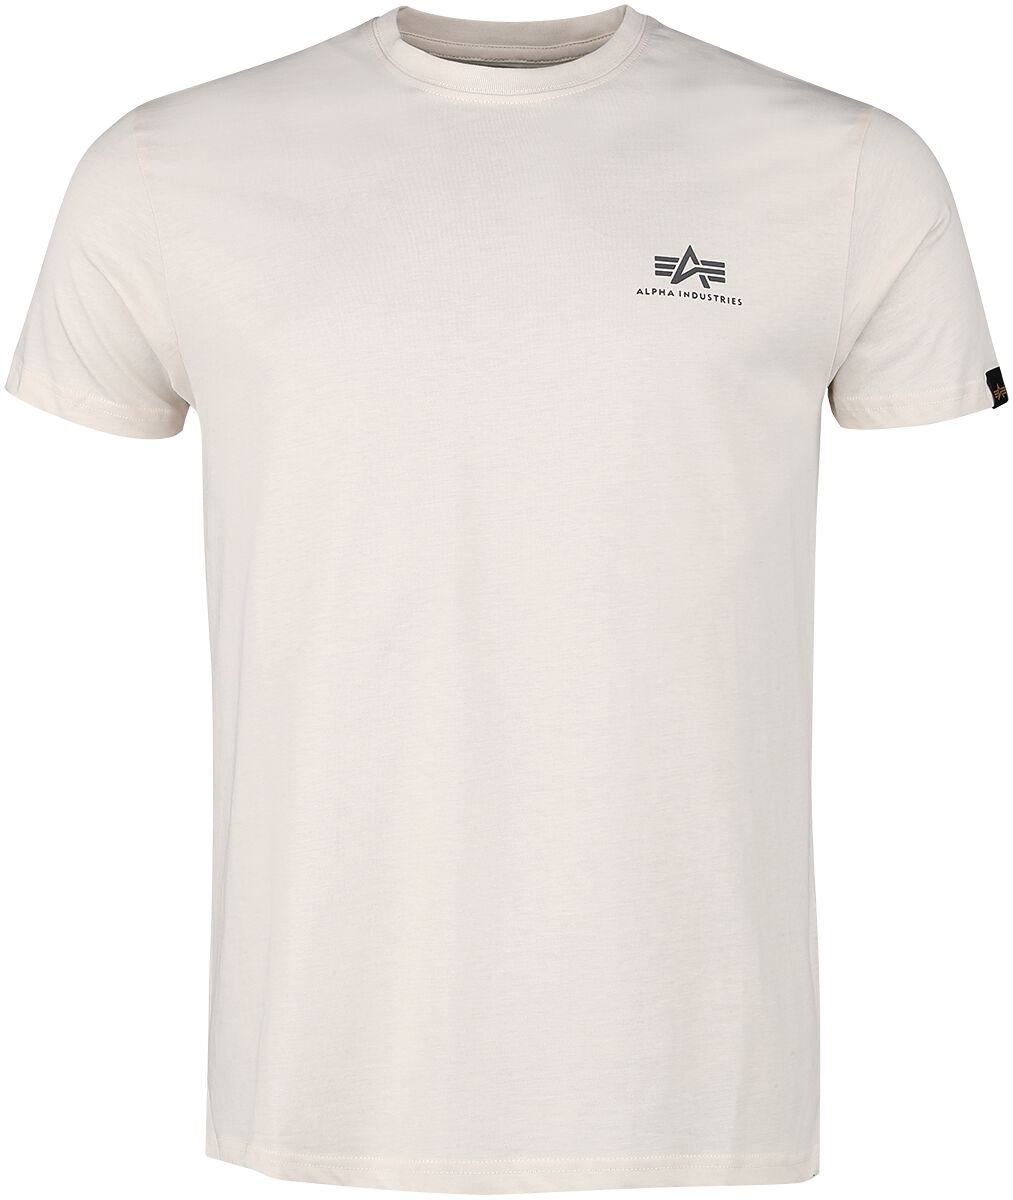 Alpha Industries Backprint T T-Shirt creme in M